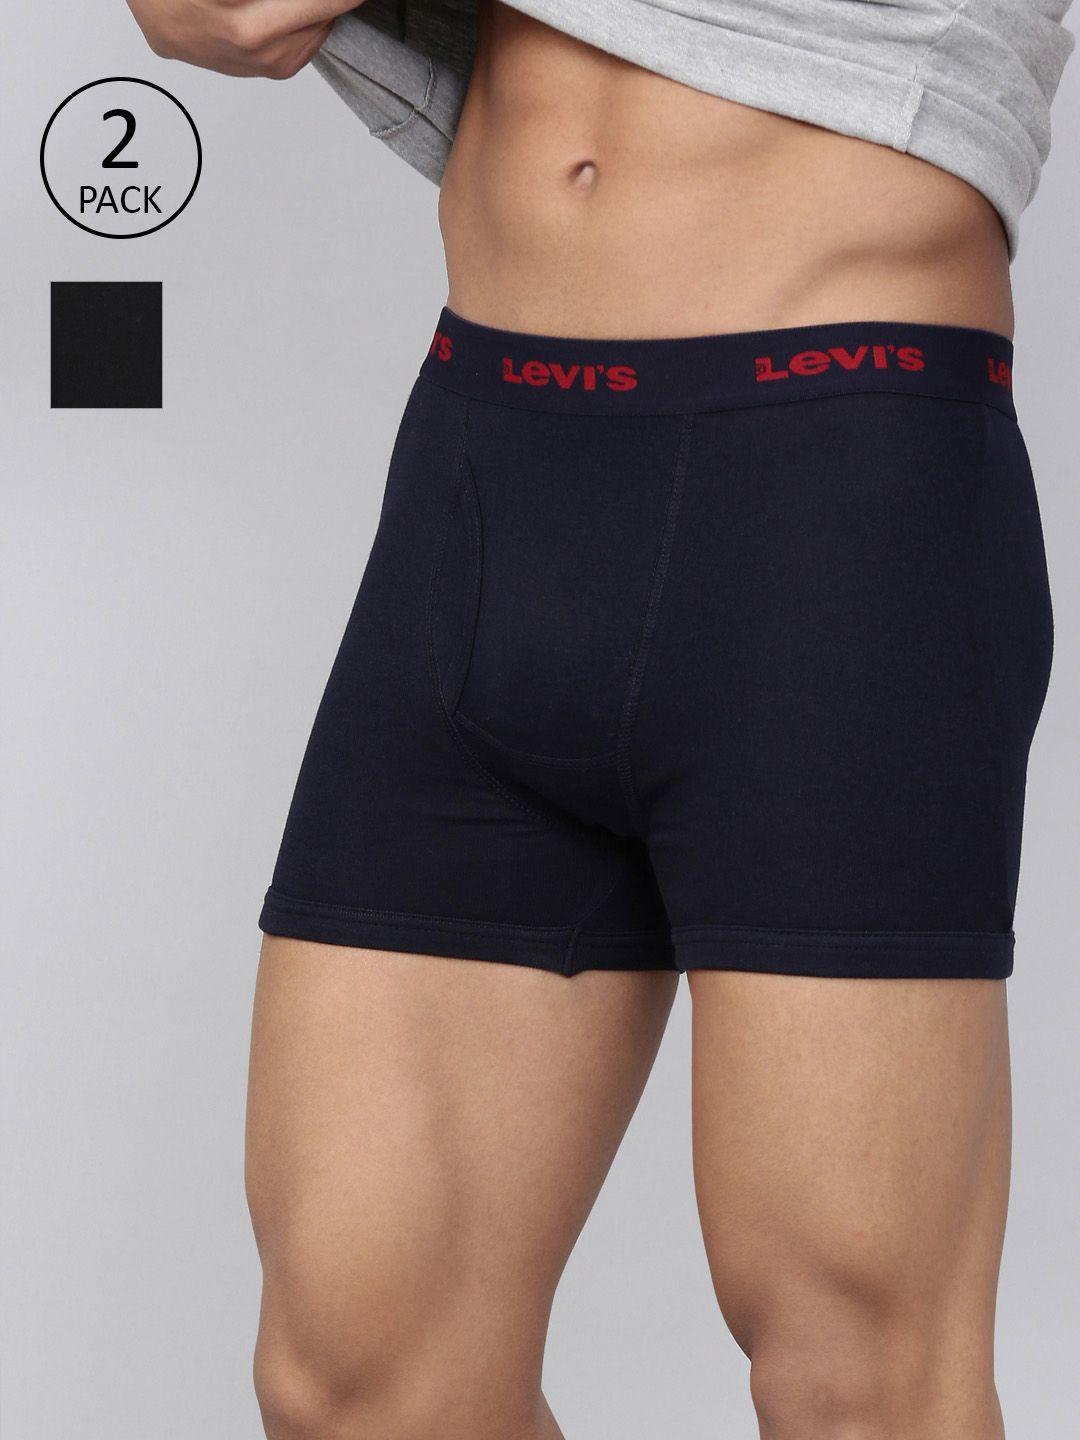 levis-pack-of-2-smartskin-technology-cotton-trunks-with-tag-free-comfort-#001-boxer-brief